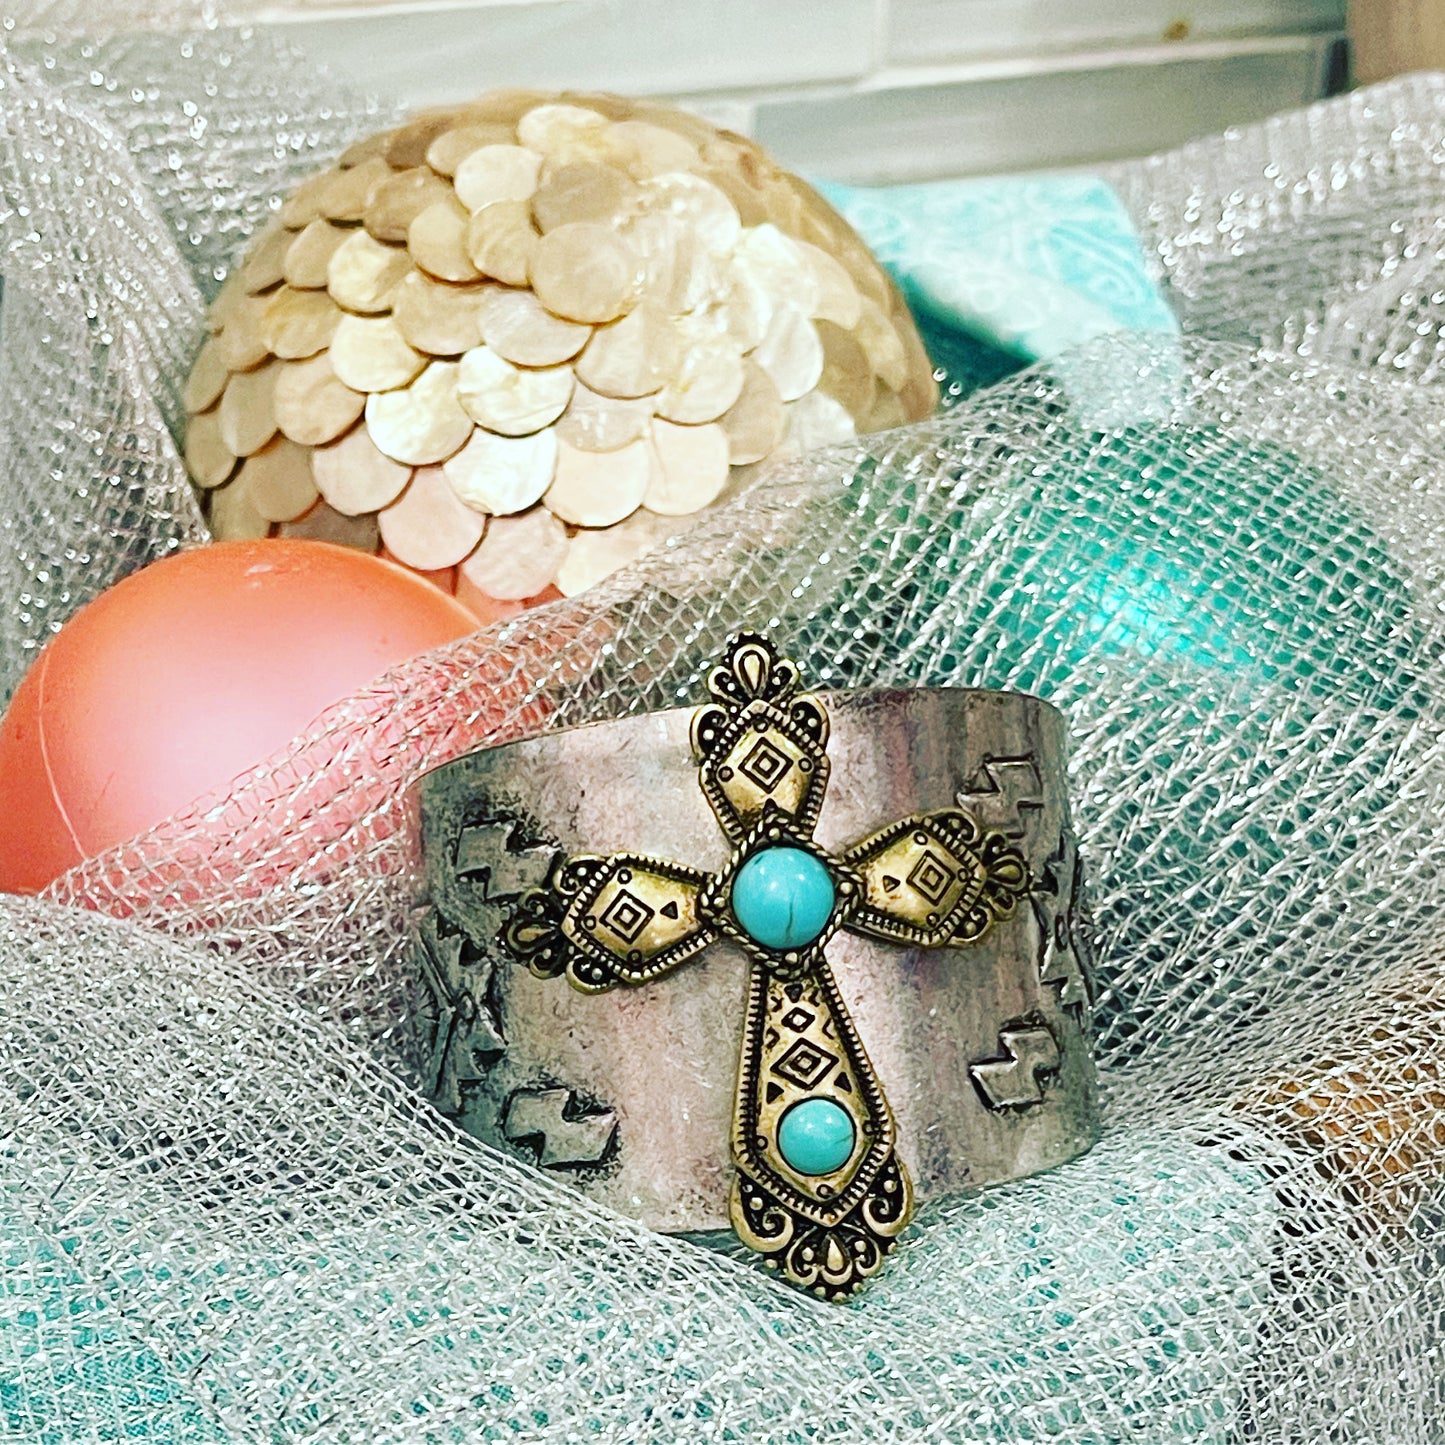 Western Cross Cuff Two Tone Bracelet Turquoise Colored Stones